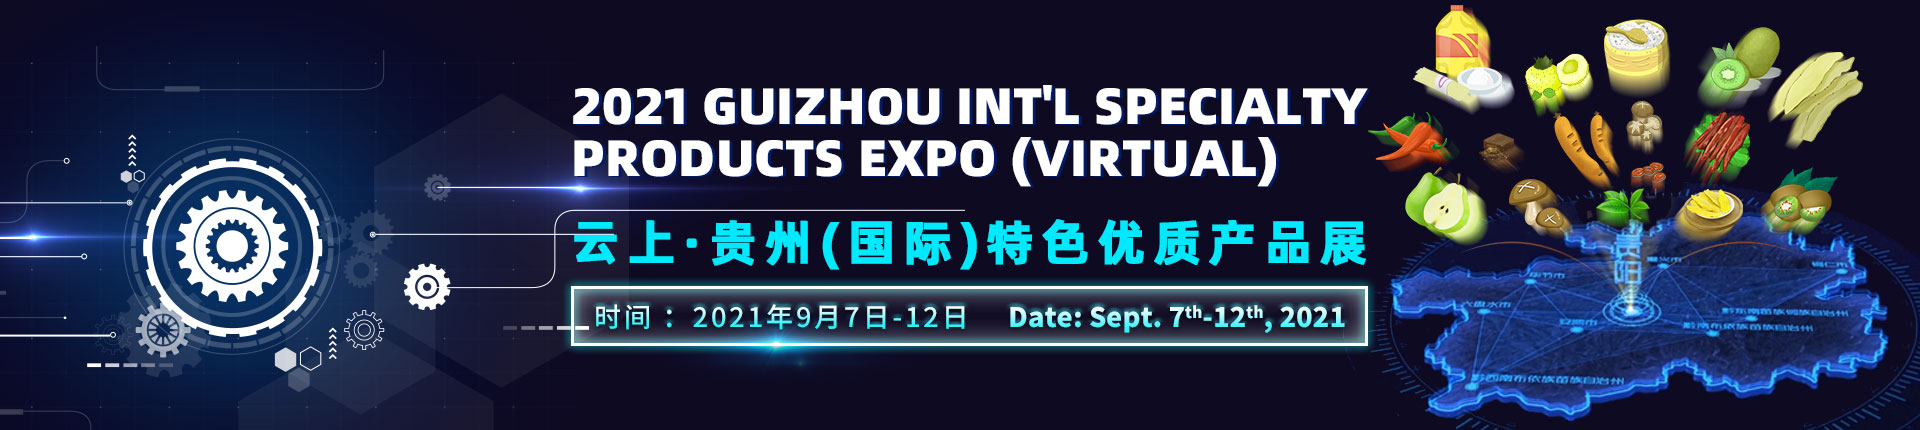 2021 Guizhou Int’l Specialty Products Expo (Virtual), Virtual, American Samoa